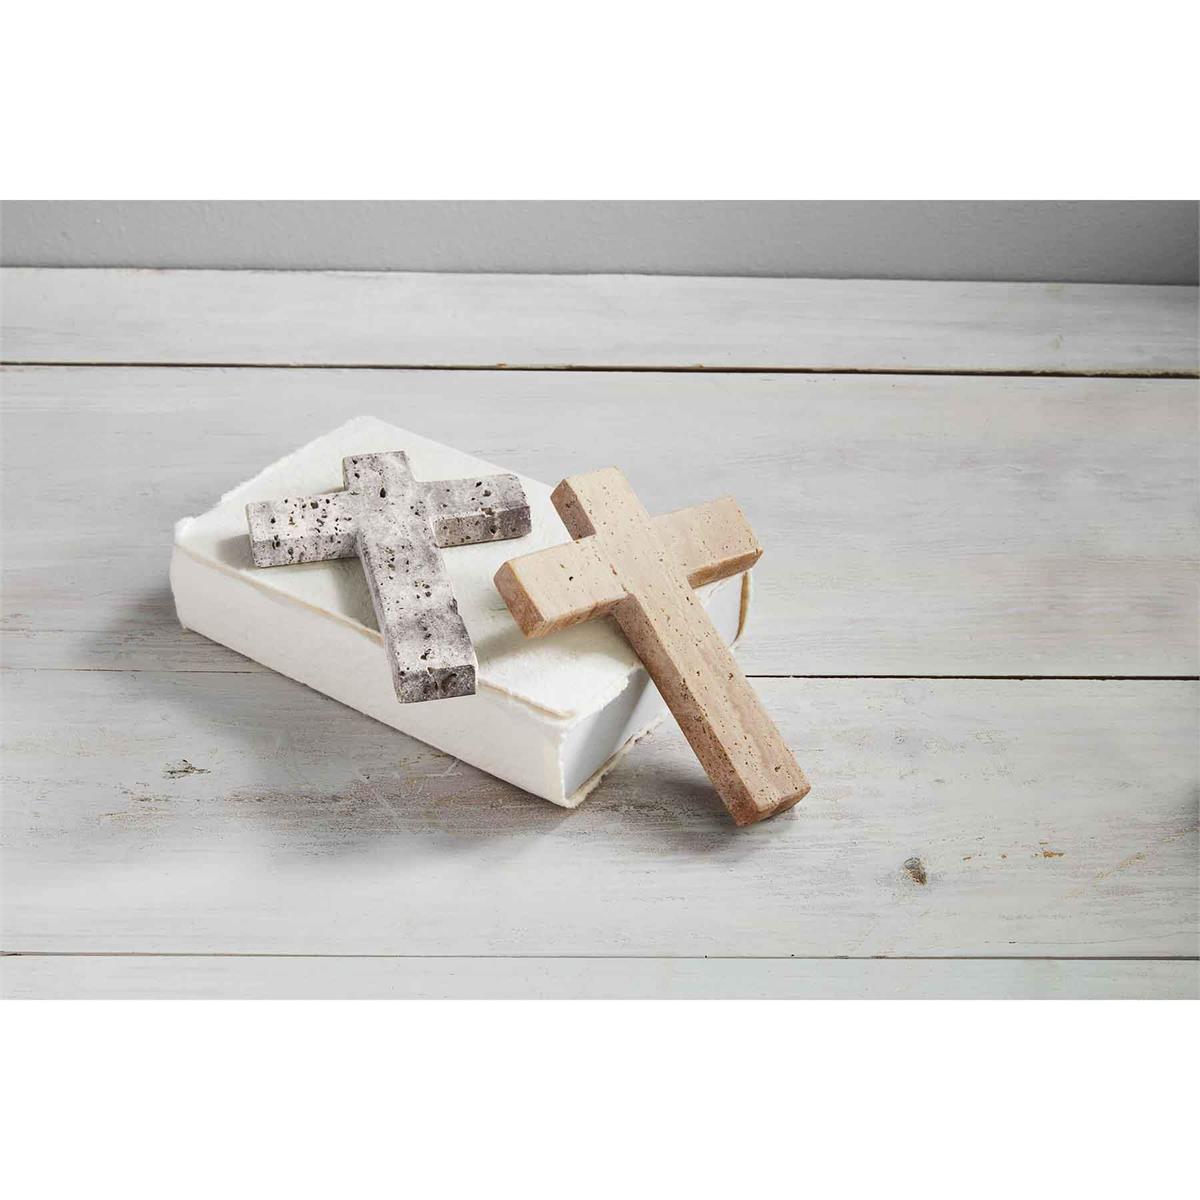 both styles of travertine crosses displayed with a book on a gray wood slat surface